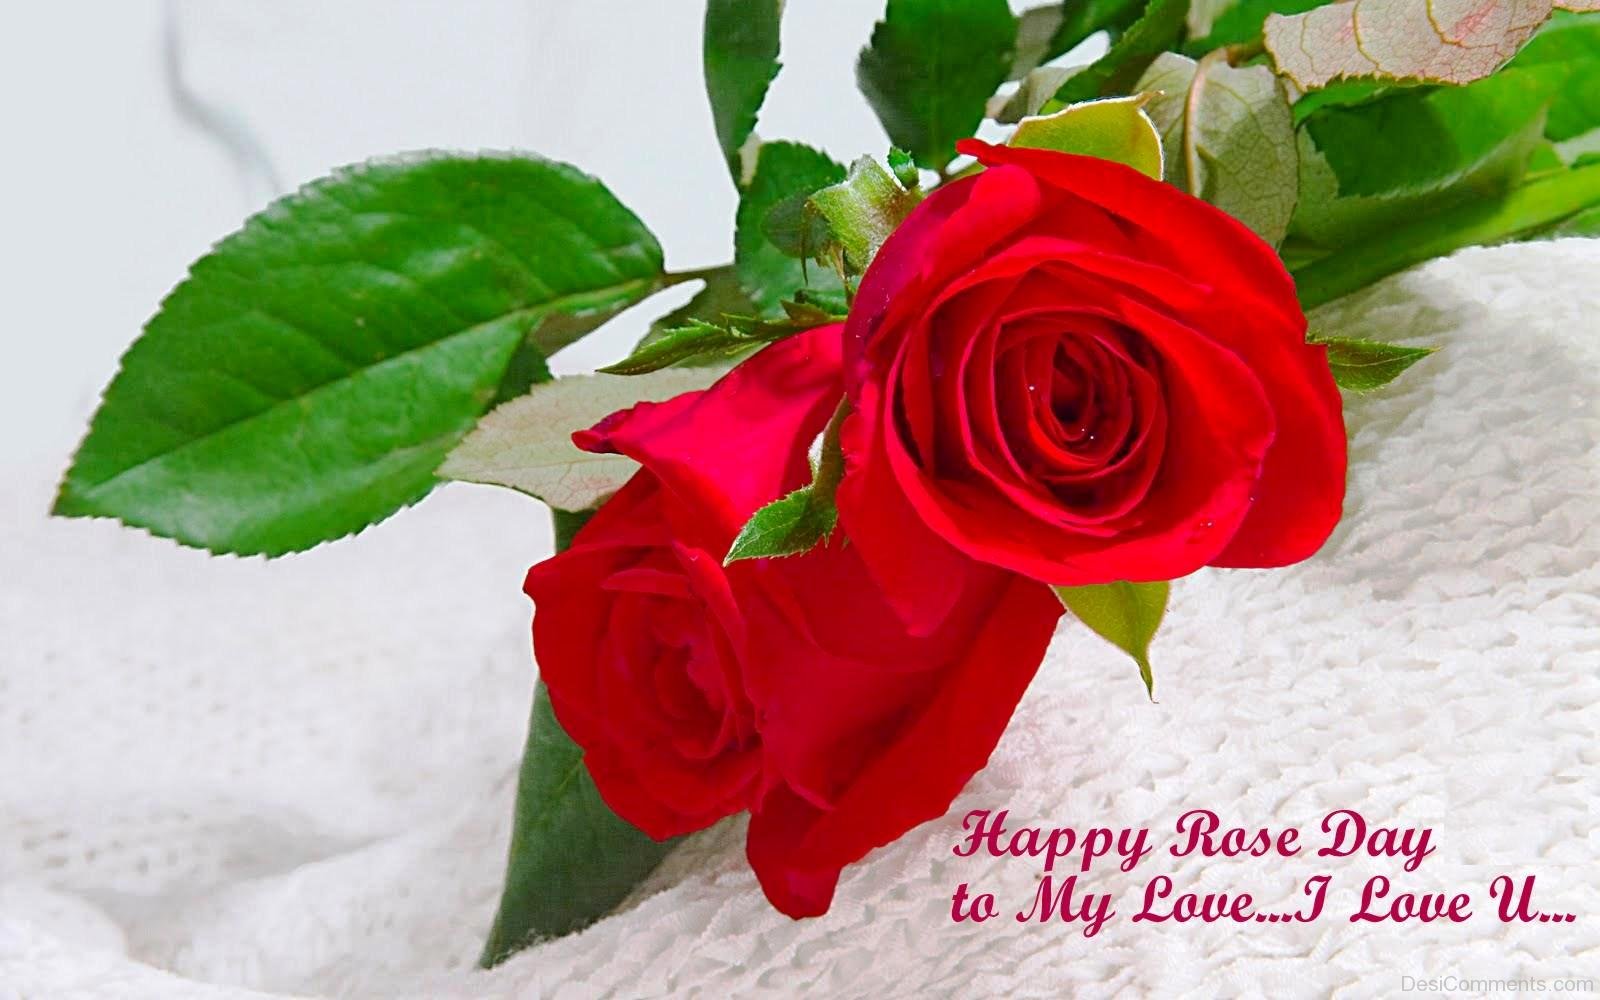 Happy Rose Day To My Love - DesiComments.com